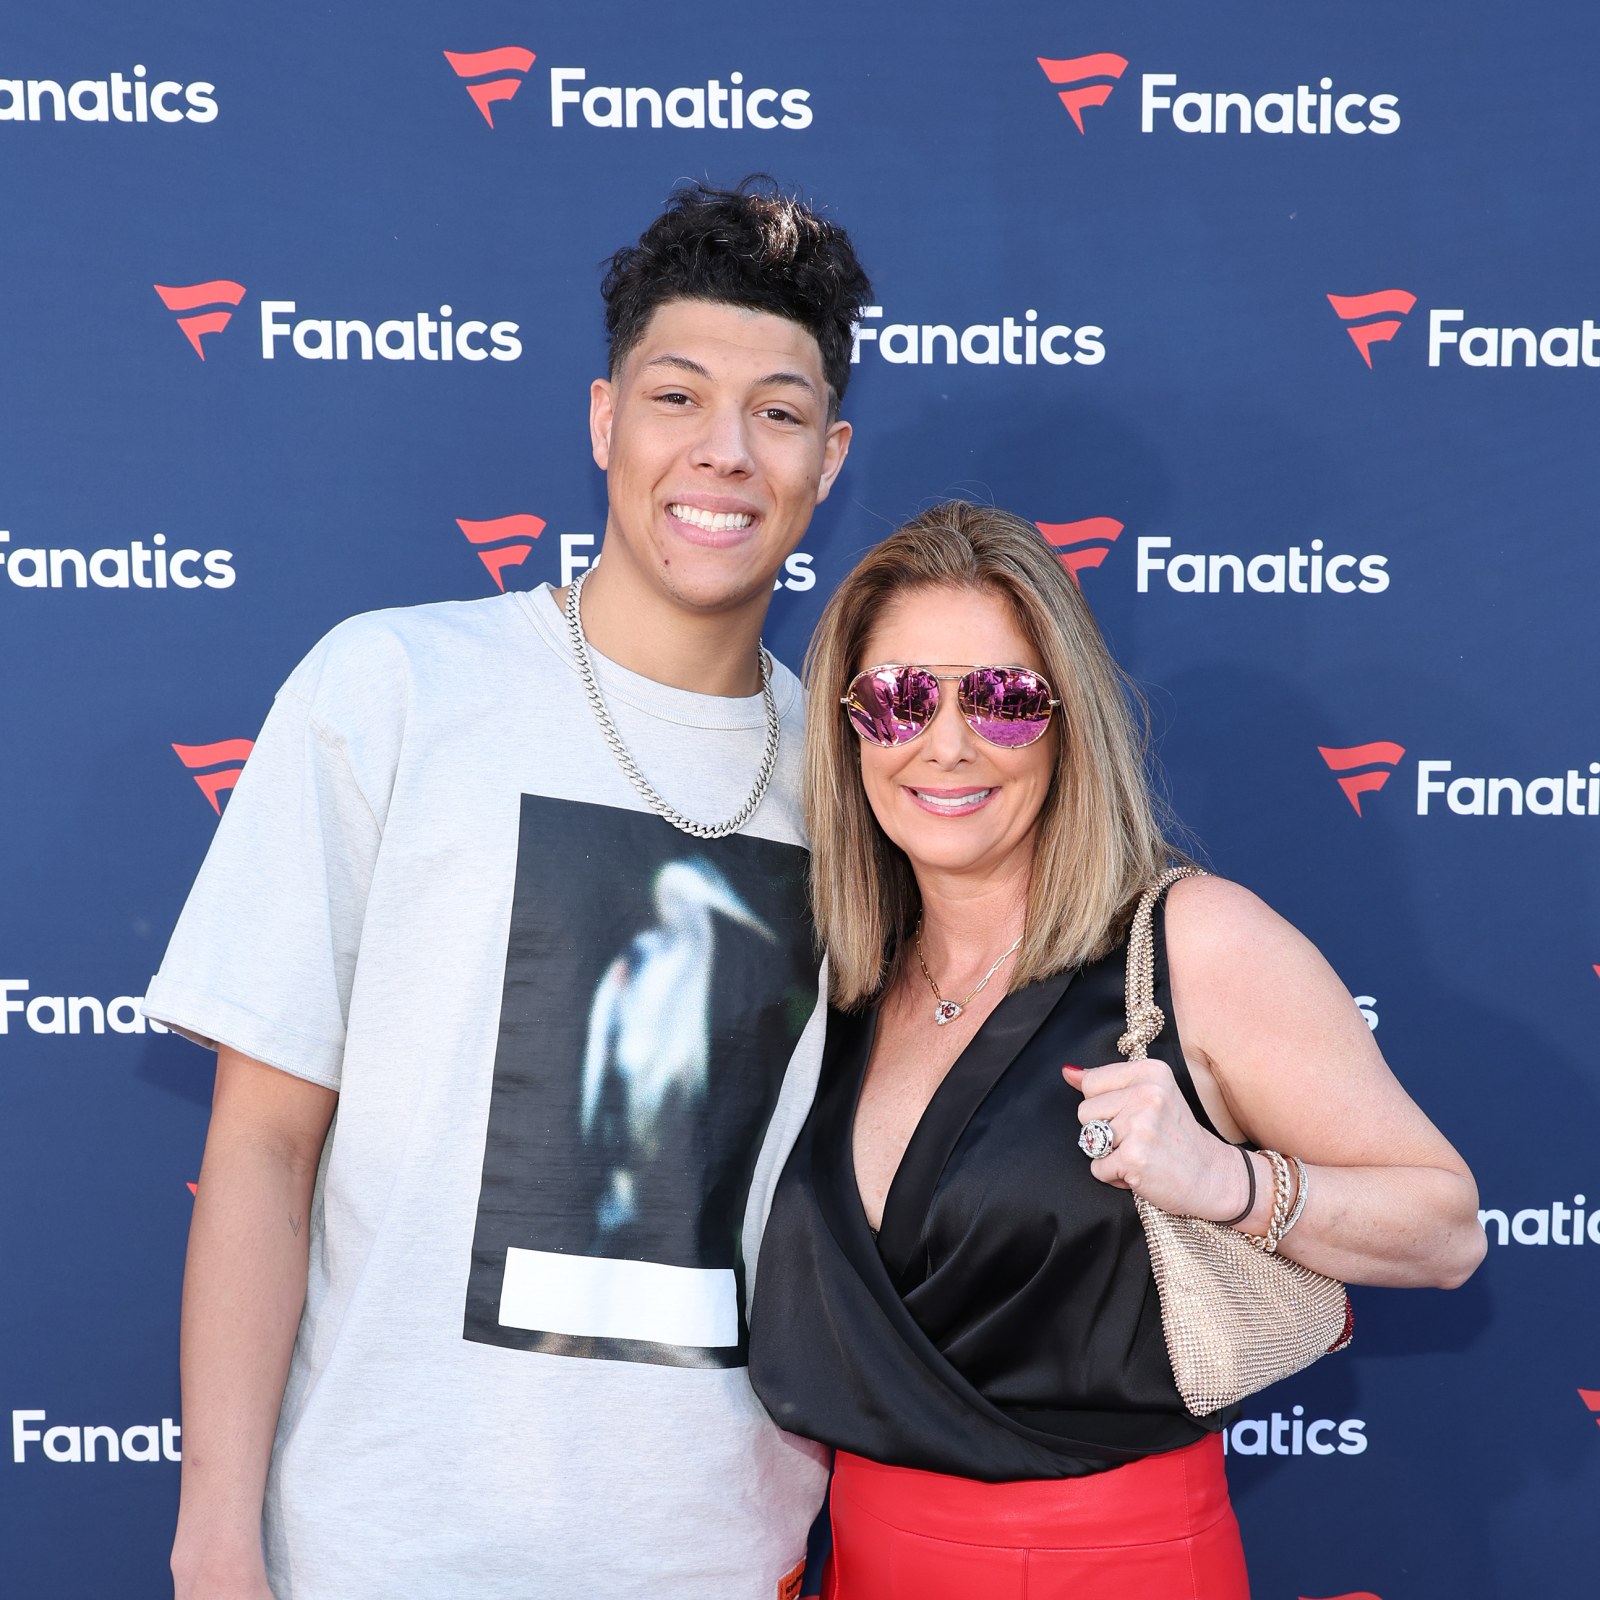 Patrick Mahomes' Mom Spent Kansas City Visit With Jackson After Allegations